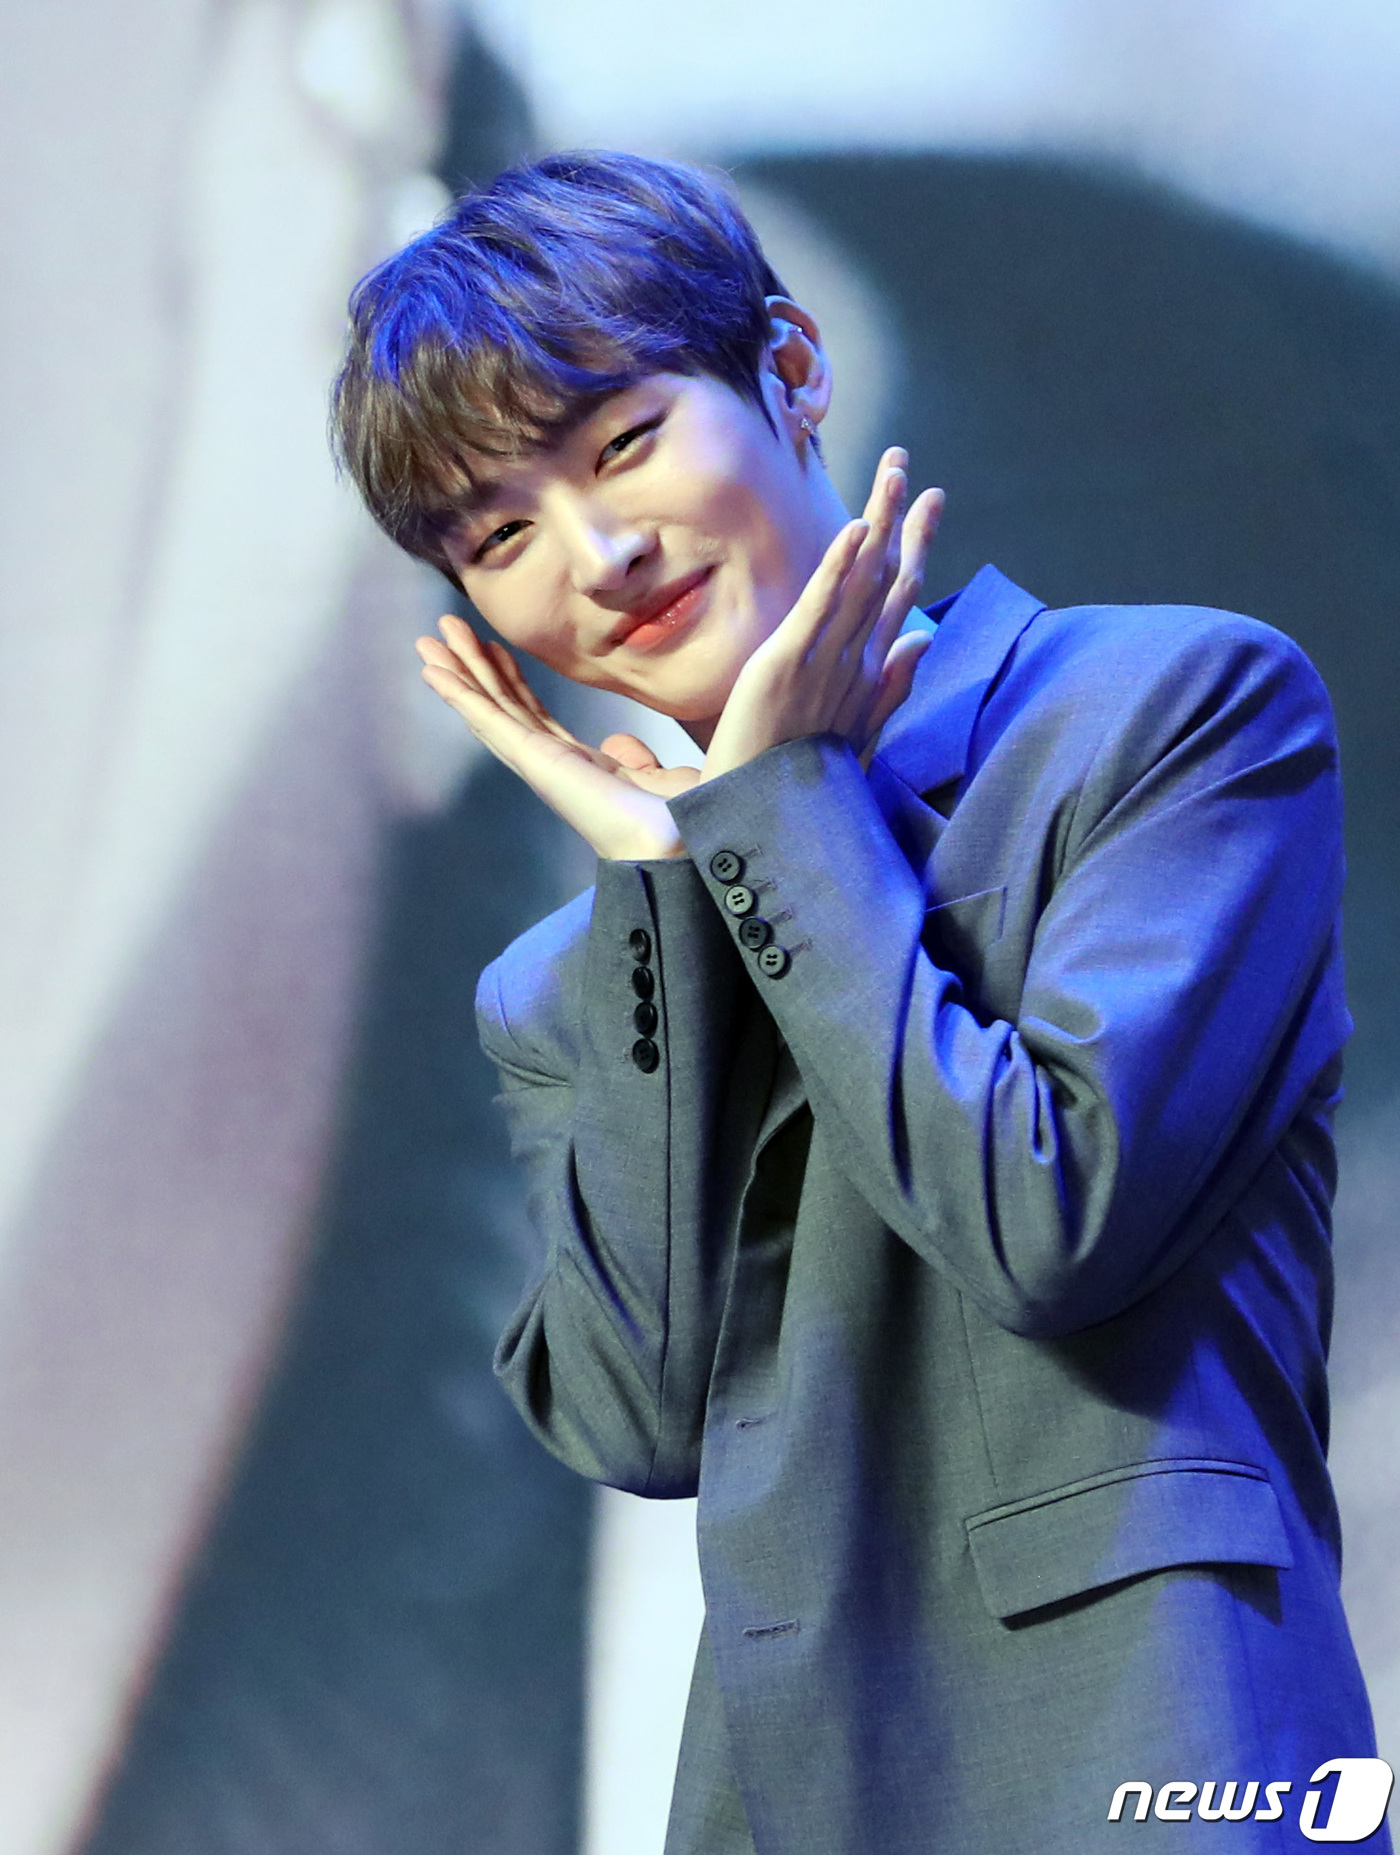 Singer Yoon Ji-sung proudly debuts solo after Wanna One activityYoon Ji-sung is the first member of Wanna One to release a solo album in earnest.Yoon Ji-sung opened a showcase for his first solo album Aside at Blue Square in Hannam-dong, Seoul, at 4 p.m. on the 20th.Im really nervous, Im so excited, Ive prepared a lot, Ive prepared a lot, but Im worried too, said Yoon Ji-sung.Yoon Ji-sung said, Lee Dae-hwi participated in the song comma and said, It is a song written by our youngest Dae-hui, and I am attached because I wrote it myself. This morning, I called Daehwi. He said, Chimpe is good.I want to hear the modifier of emotion if it is intellectual, and I want to let you know that there is a variety of charm through this solo album, said Yoon Ji-sung.When I was in Wanna One, I felt like I was in the concept, but this time I was all concerned because I had to show people to me, said Yoon Ji-sung.I think its different to draw a song that I have a voice because I do what 11 people do alone, he added.I feel a lot of vacancies, but I think I can show various charms in the form of Yoon Ji-sung, he added.Yoon Ji-sung is planning to join the military this year, so he said, Im well prepared for solo albums and musicals Days of the Day together.Now, if you say that you are not sorry for Yi Gi, you are lying. But I want to show you a lot before joining the army. I am trying hard to pay back because of the person who is on stage by the fans, he added.The solo album Aside is an abbreviation for Always on your side, meaning always there are four with the motif of Bangbaek (), an ambassador in the play.I was a group Wanna One and always gave a heartfelt gratitude to the fans who believed and supported me.The title song In the Rain is a pop ballad genre with an emotional melody and an orchestral melody. It is an emotional farewell song with a sincere heart that welcomes a farewell without preparation from a loved one.I like the original acoustic songs, all the songs are really attached, Yoon Ji-sung explained of the deep emotional songs that remain.